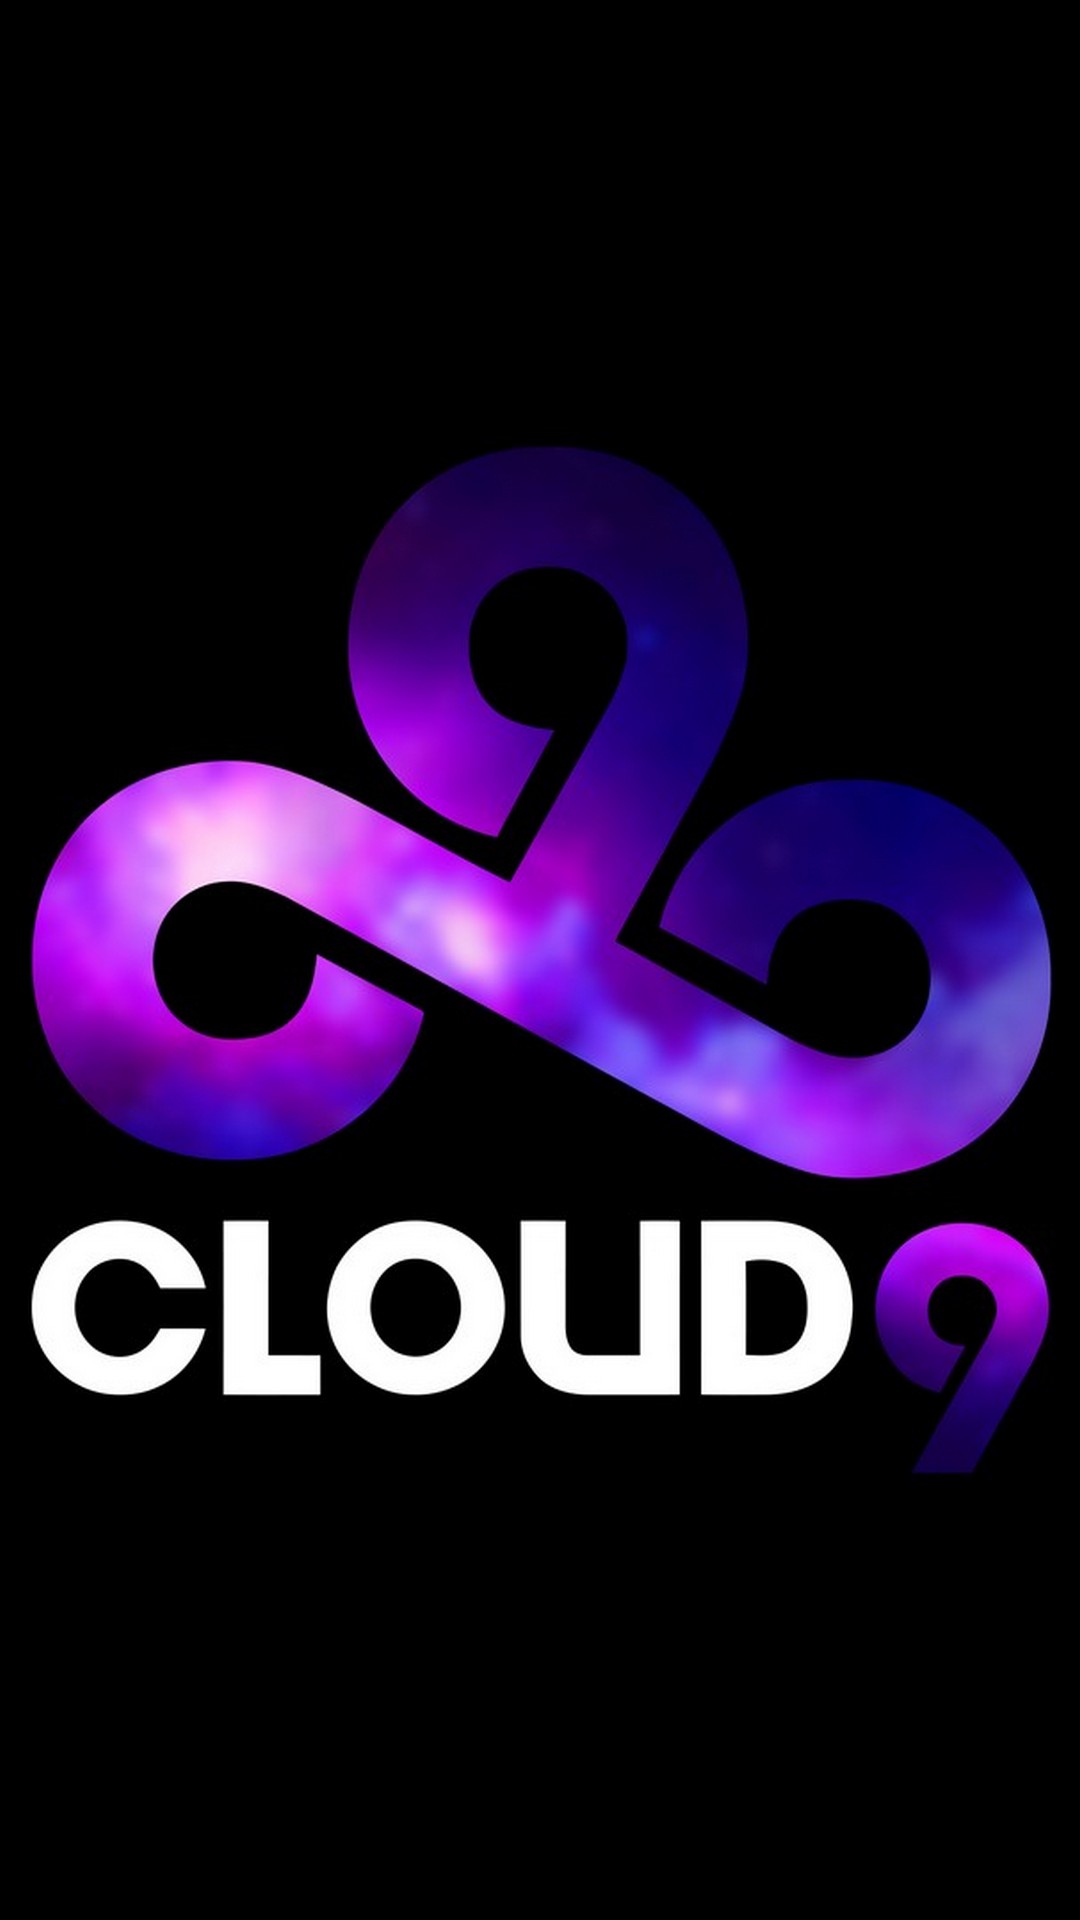 Cloud 9 Games Wallpaper For Mobile 1080x1920